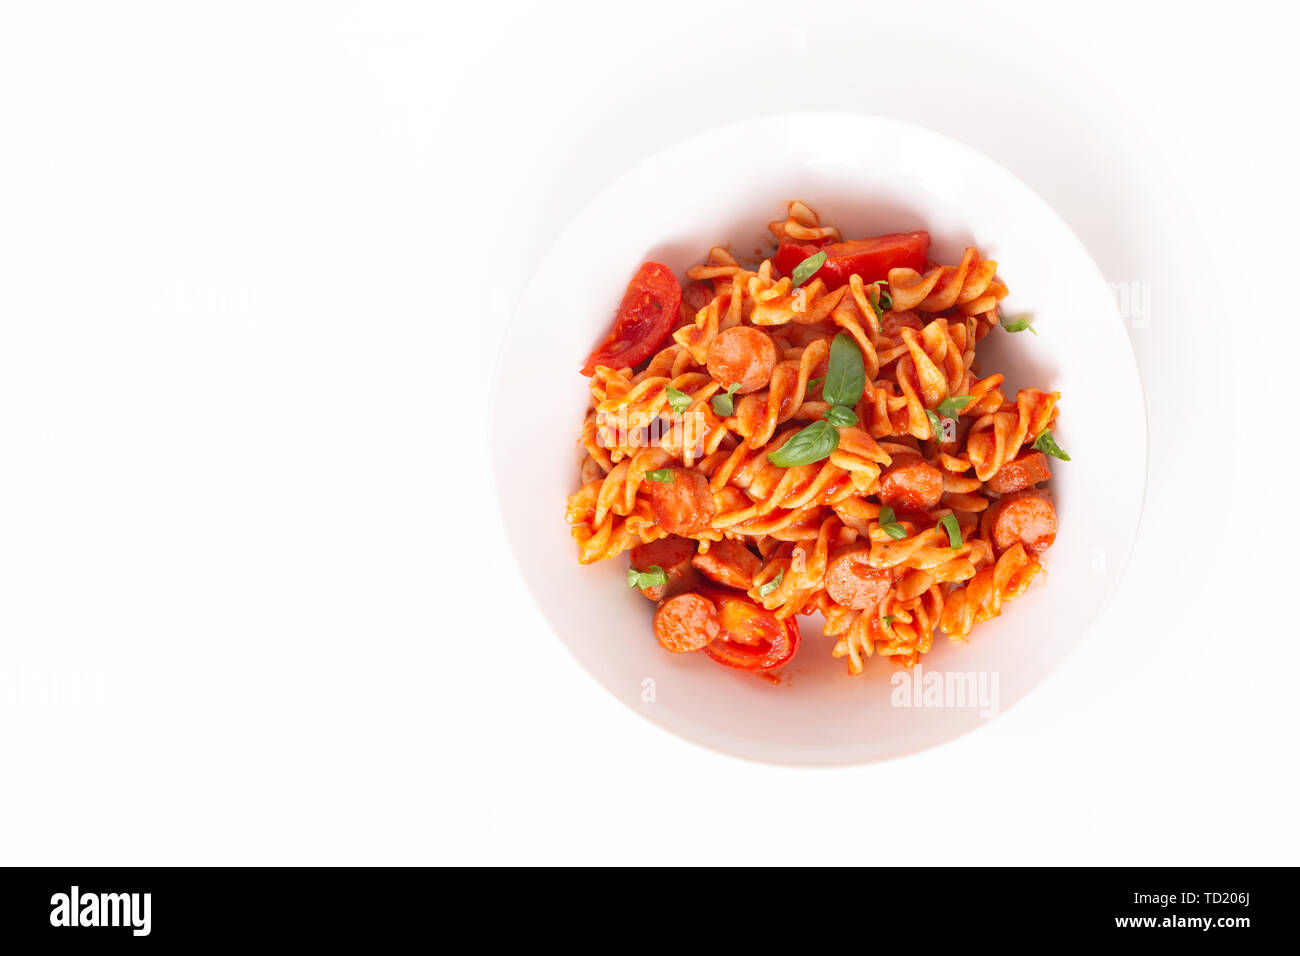 Food concept Homemade Fusilli pasta with tomato sauce in a white dish on white background Stock Photo